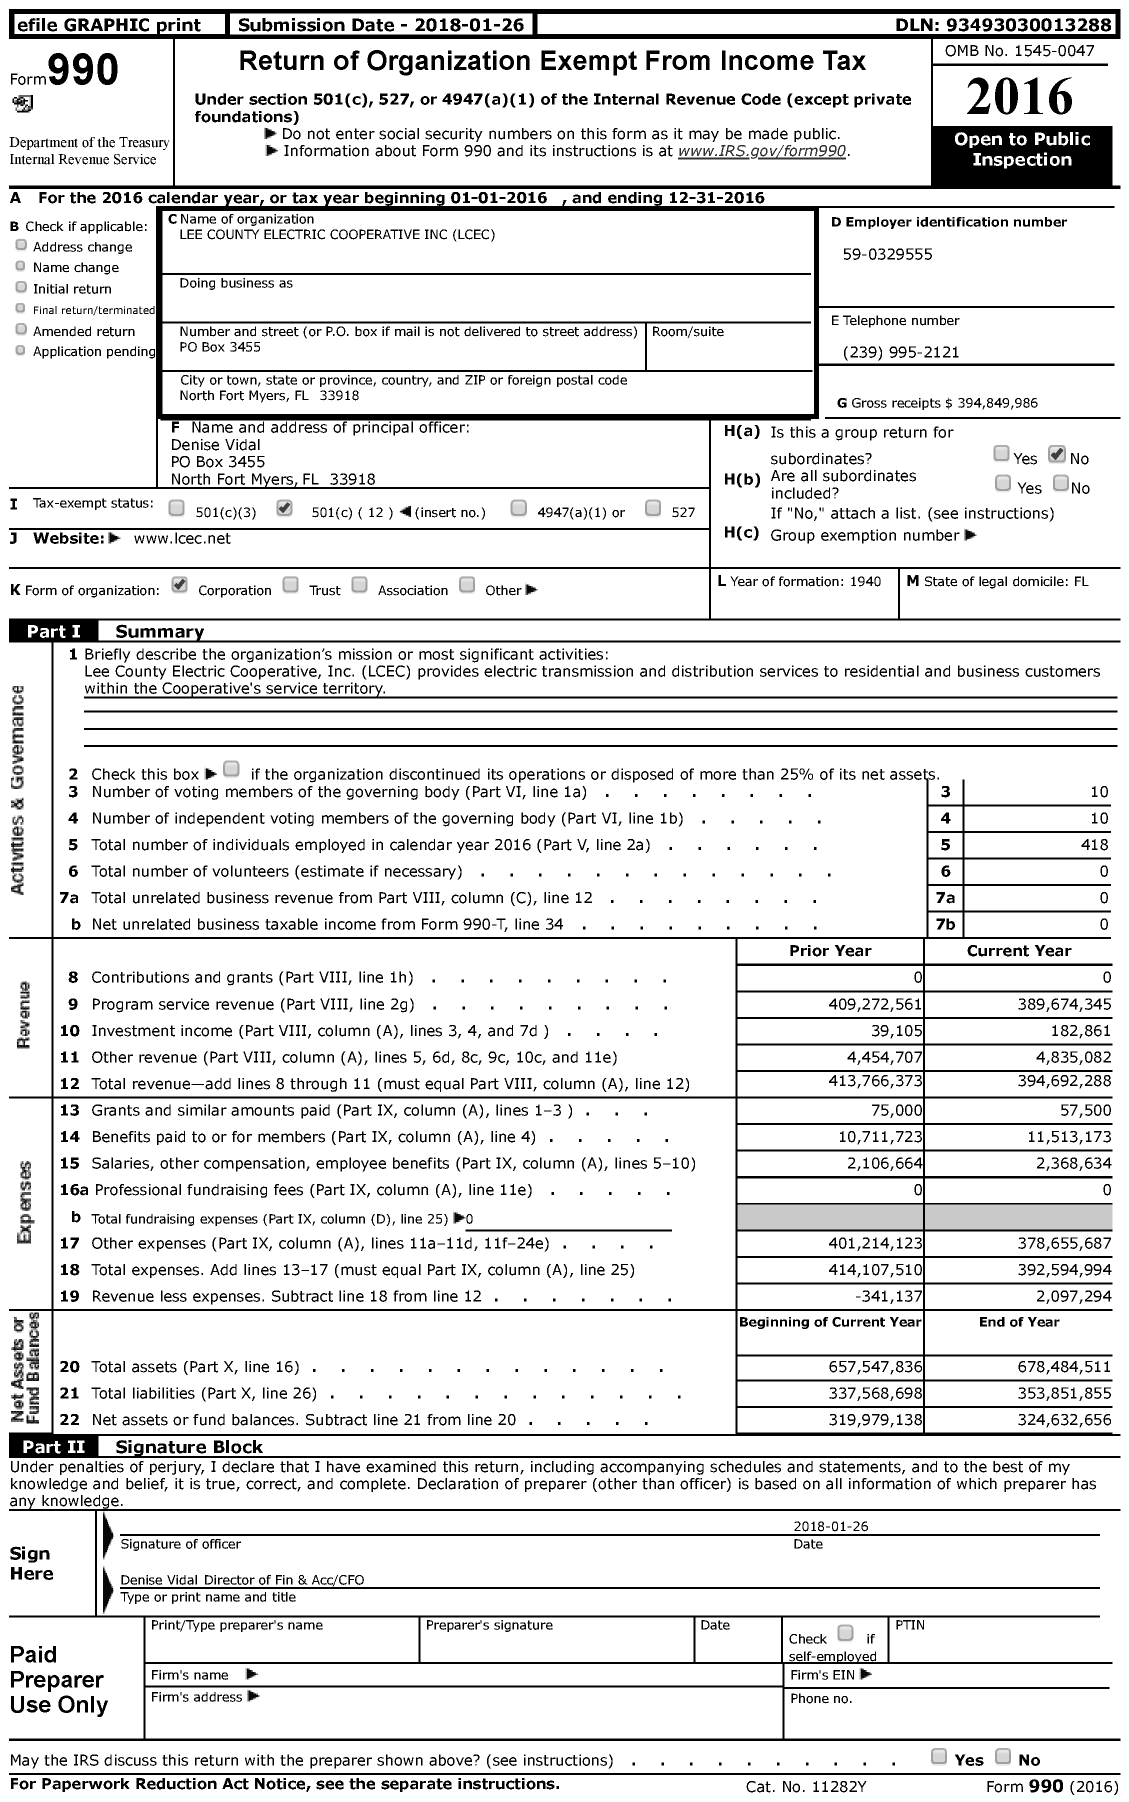 2016 Form 990 for Lee County Electric Cooperative (LCEC) | Cause IQ